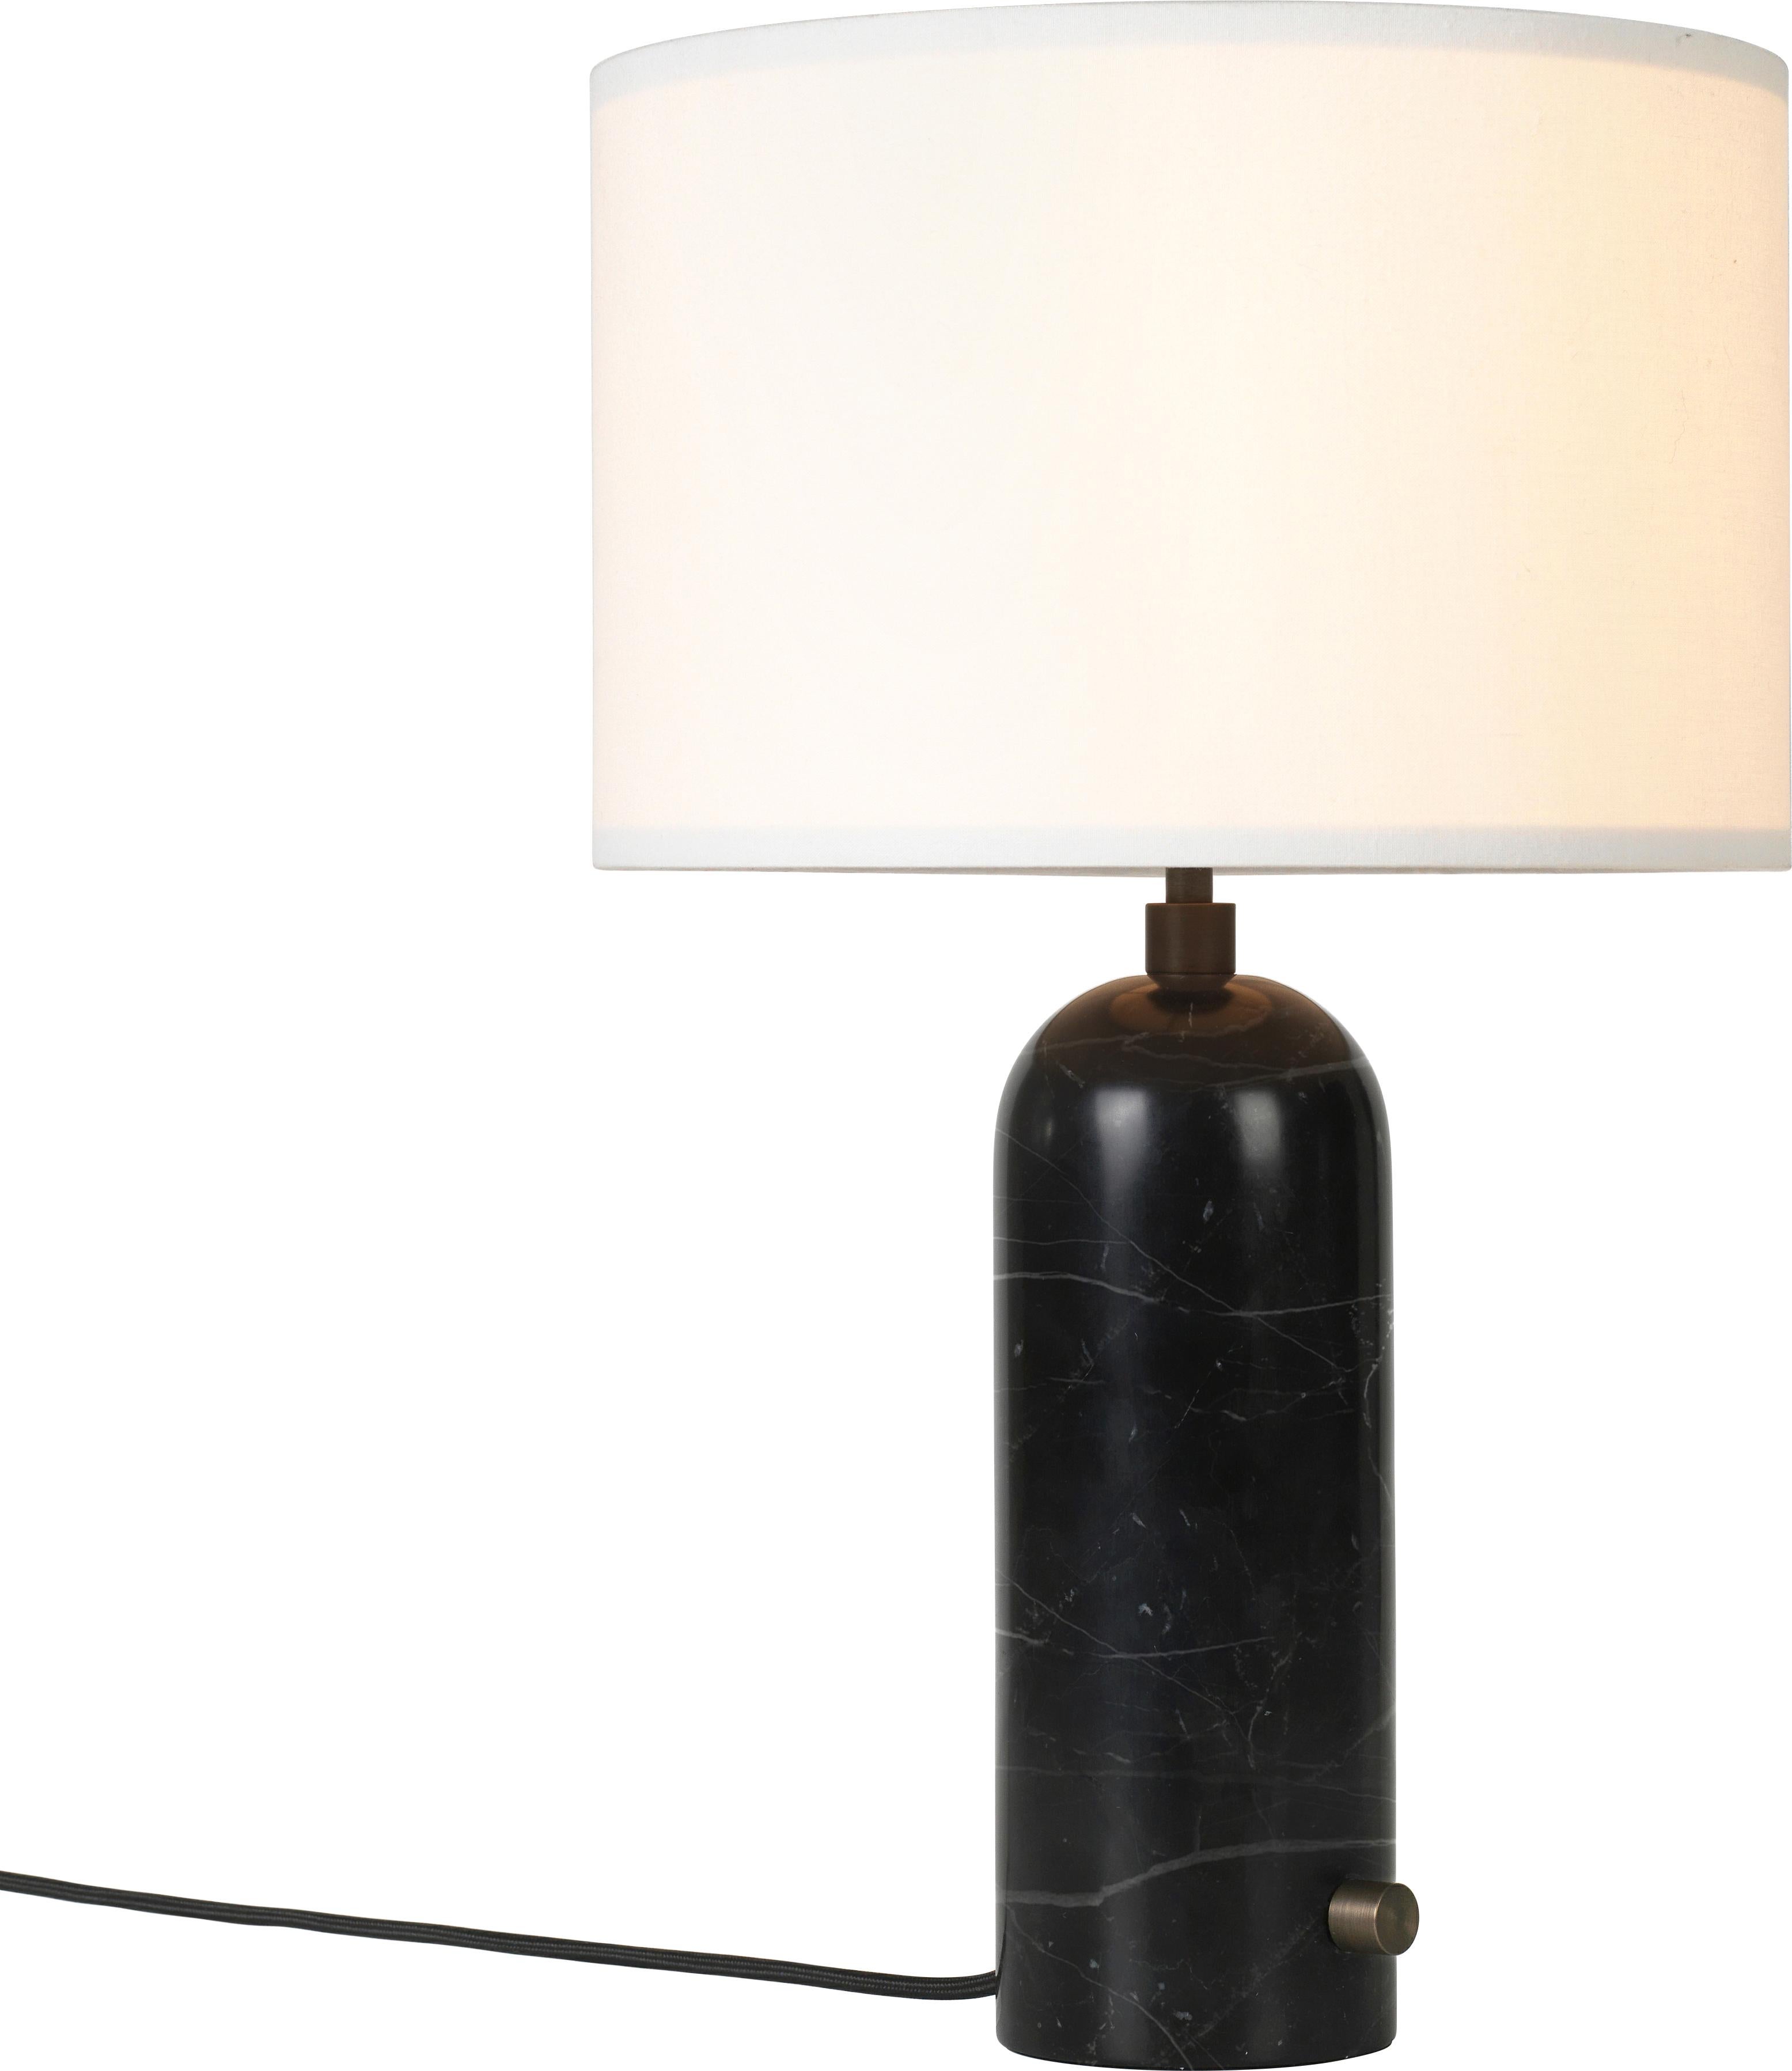 Large 'Gravity' Marble Table Lamp by Space Copenhagen for Gubi in White For Sale 11